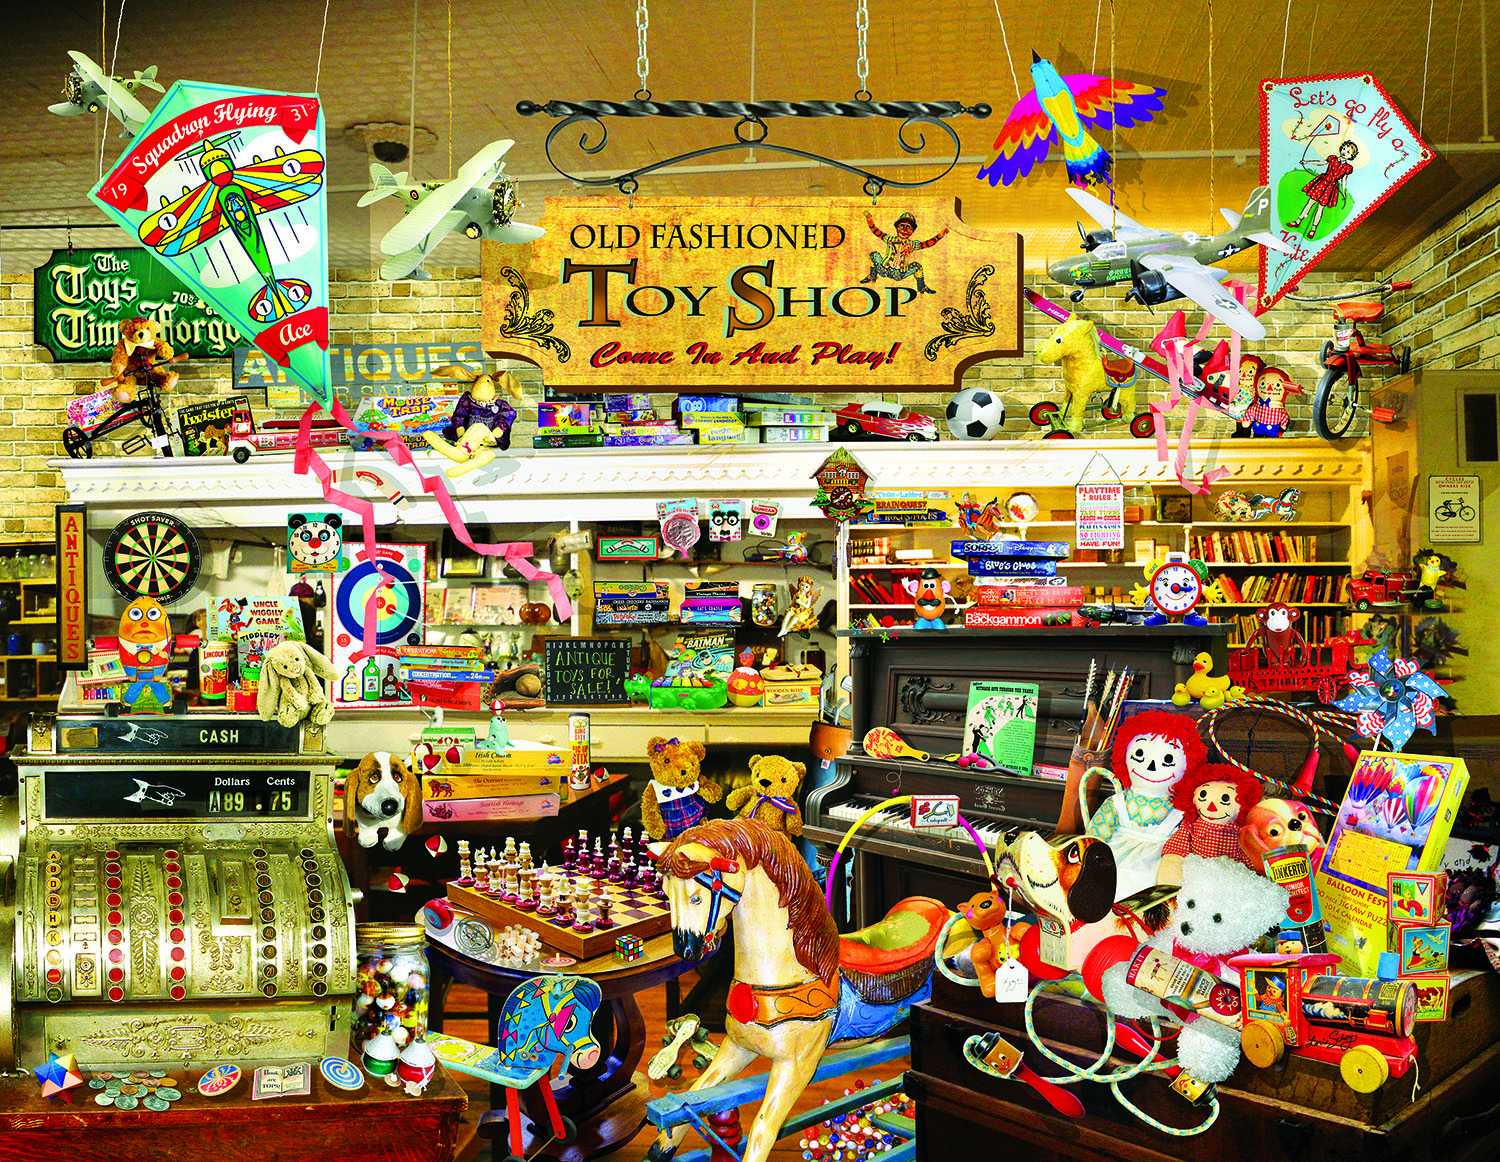 SO-34916 - An Old Fashioned Toy Shop